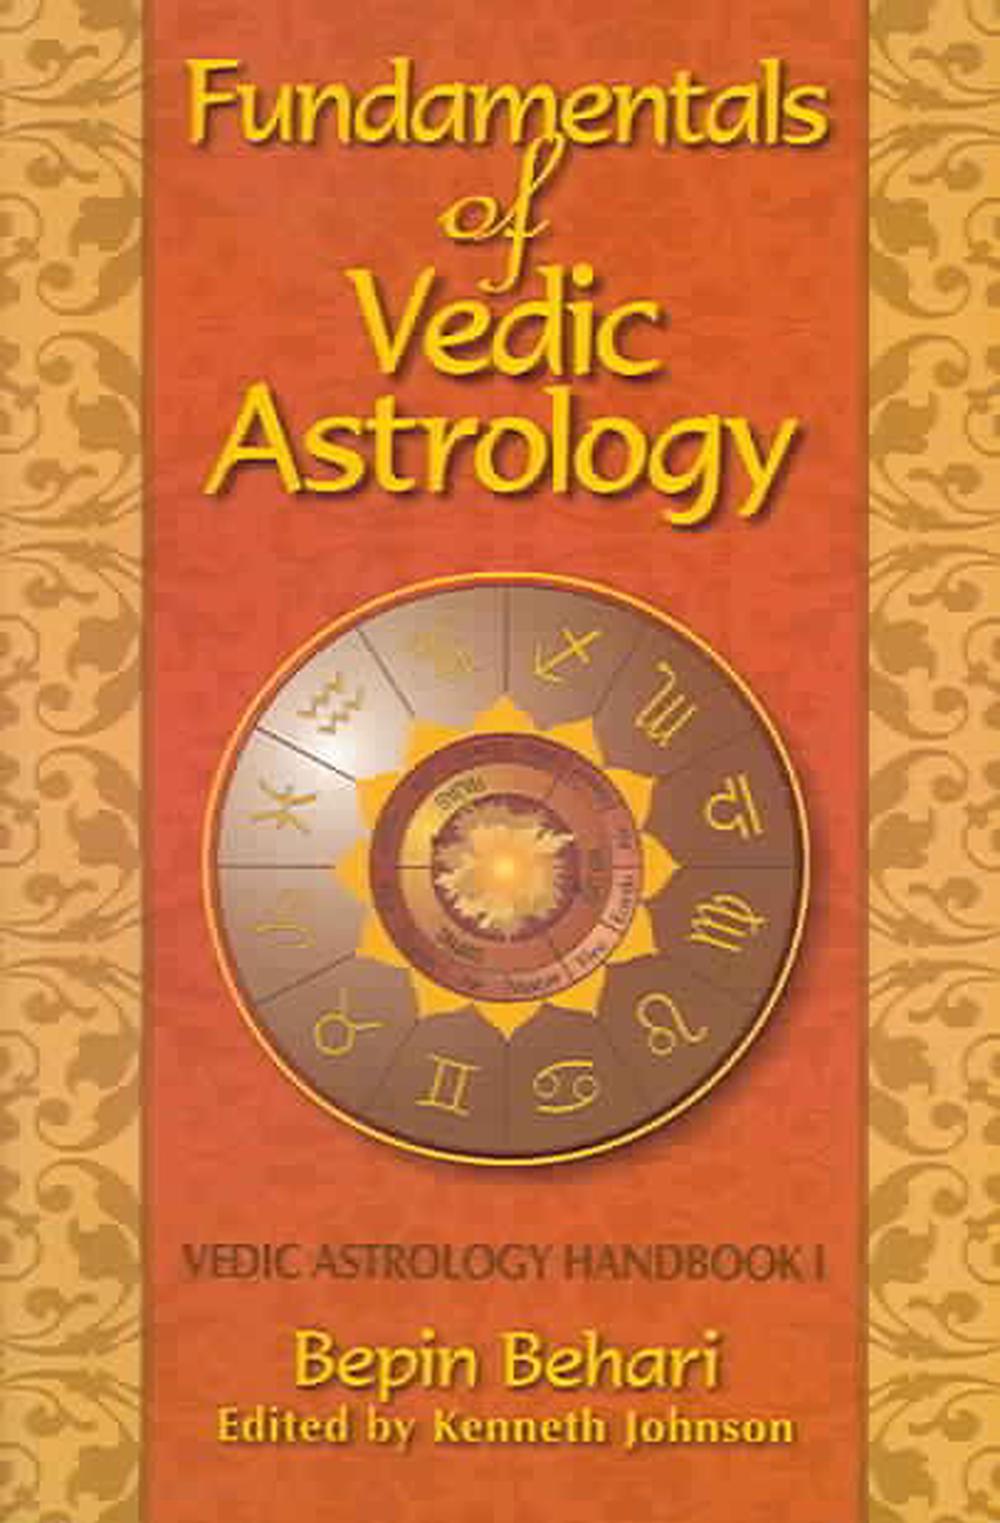 learn vedic astrology part 1